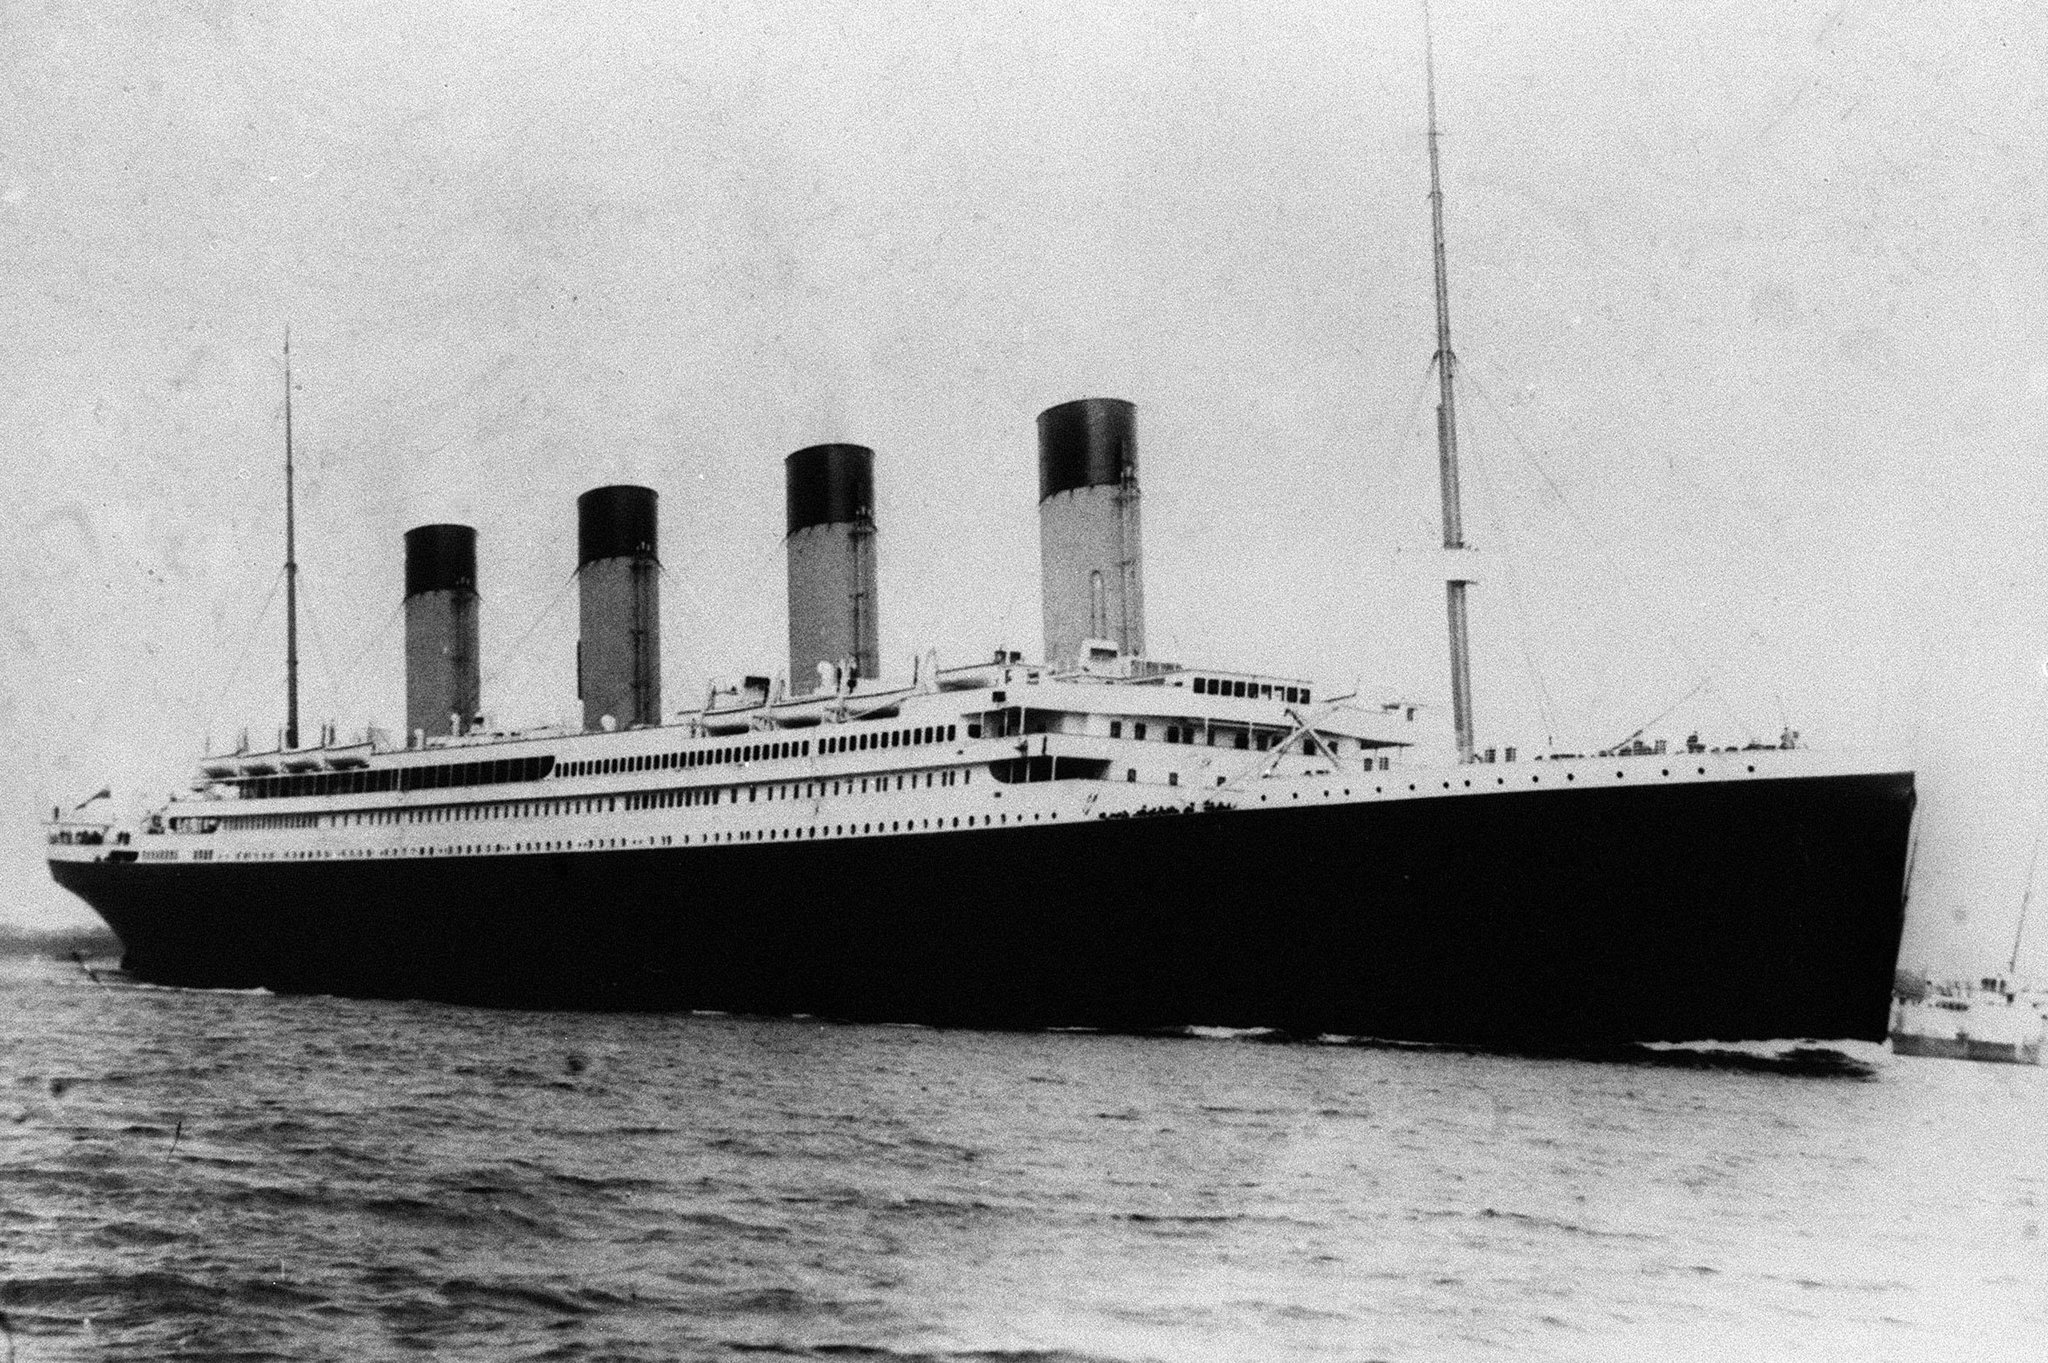 Key facts on Titanic and Belfast 110 years after it sailed on its fateful voyage